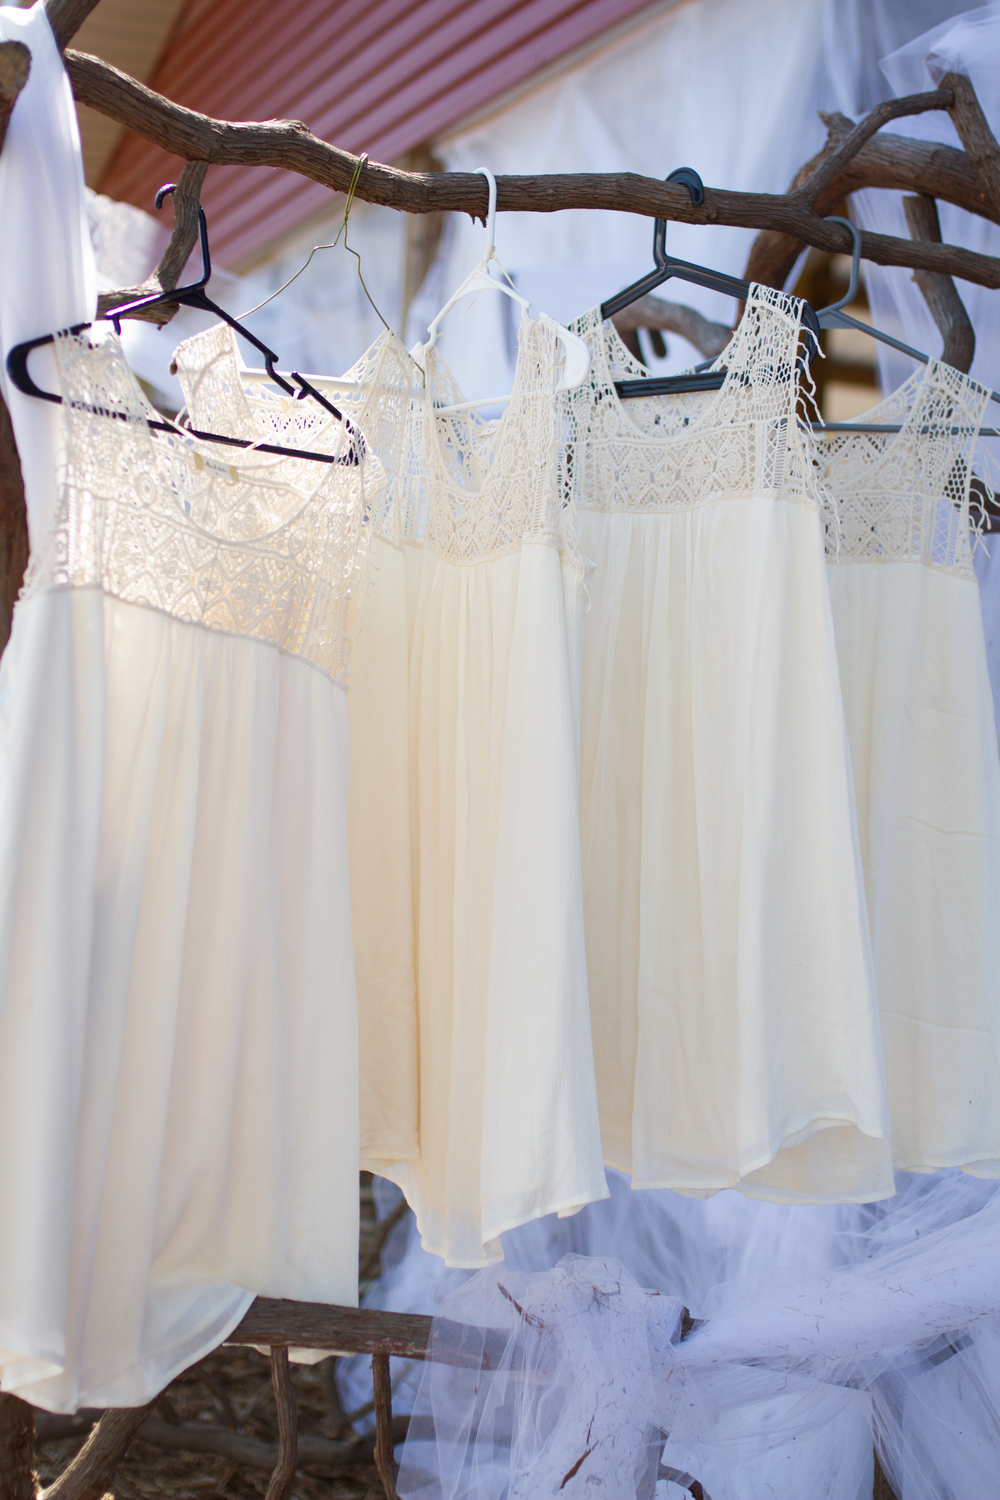 Bridesmaid dresses for the ceremony